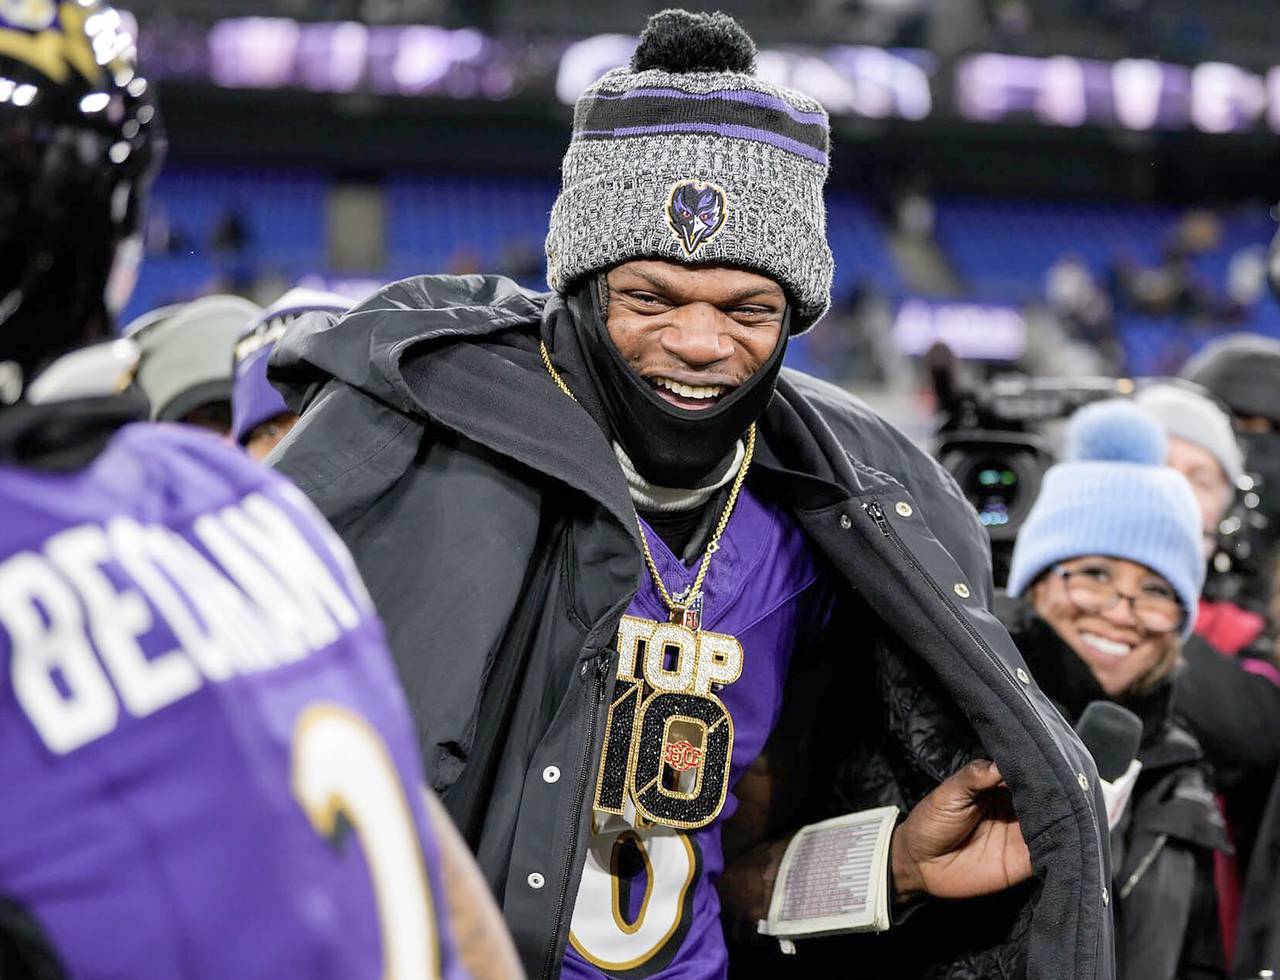 Lamar smiles after OBJ put a “Top 10” necklace on him after the game.